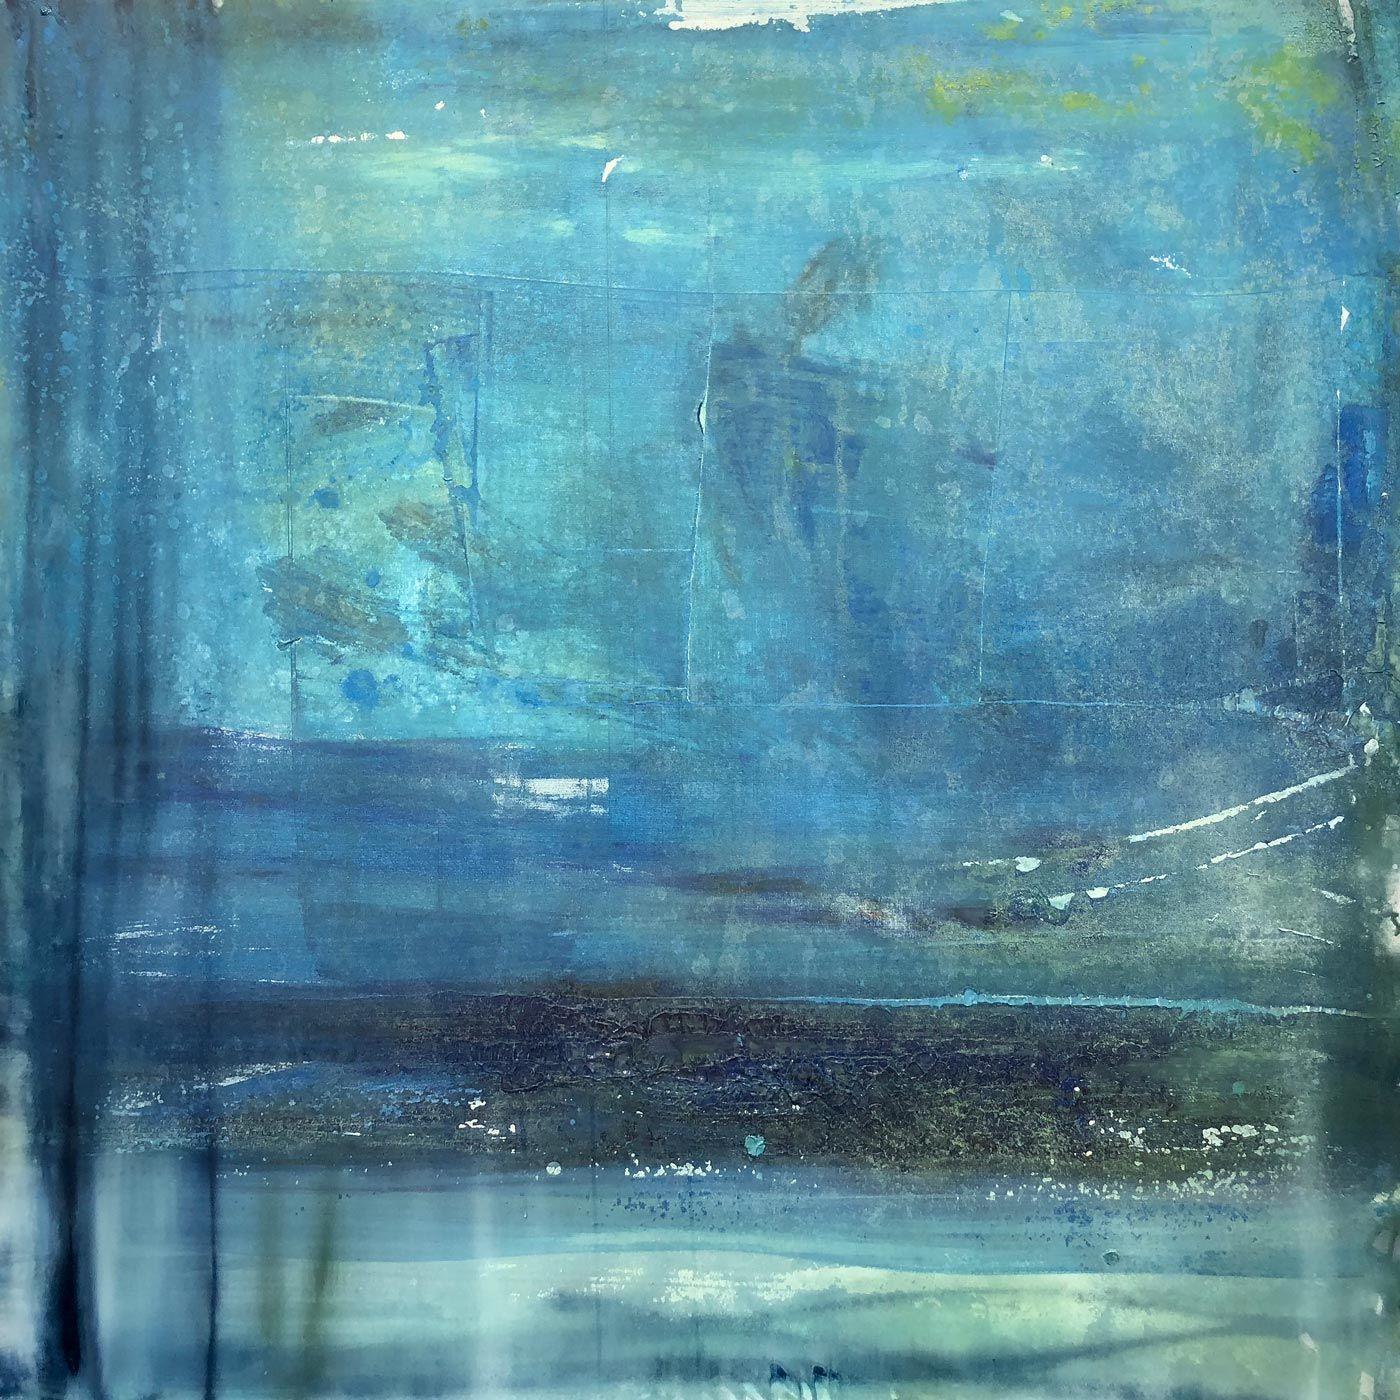 PURSUIT, Contemporary Blue Ocean Color Fine Art on Giclee Canvas: 40"H x 40"W - Painting by John Beard